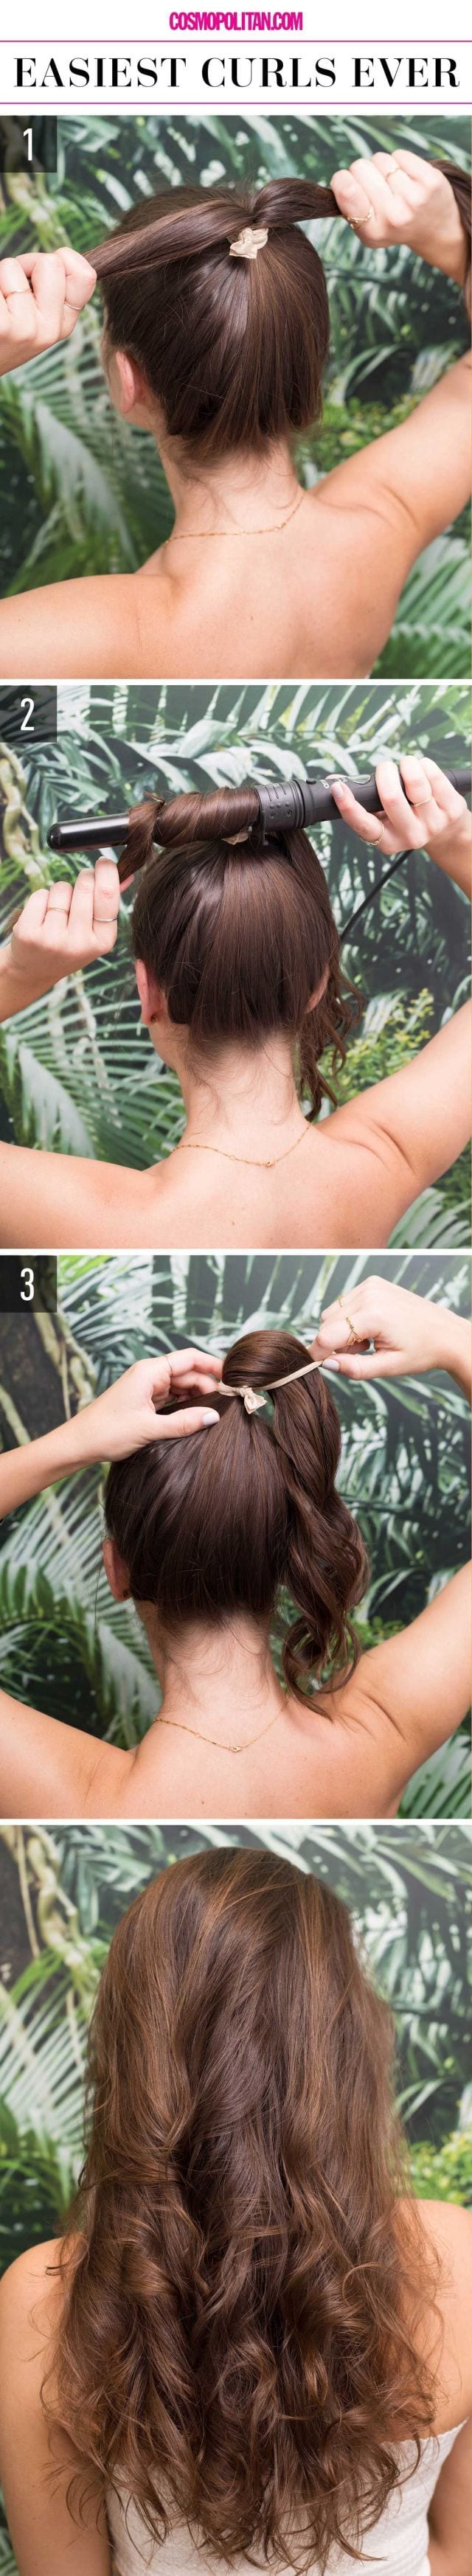 [ad_1]

The fastest and easiest way to curl your hair.
Source by meijer0654
[ad_2]
			
			…